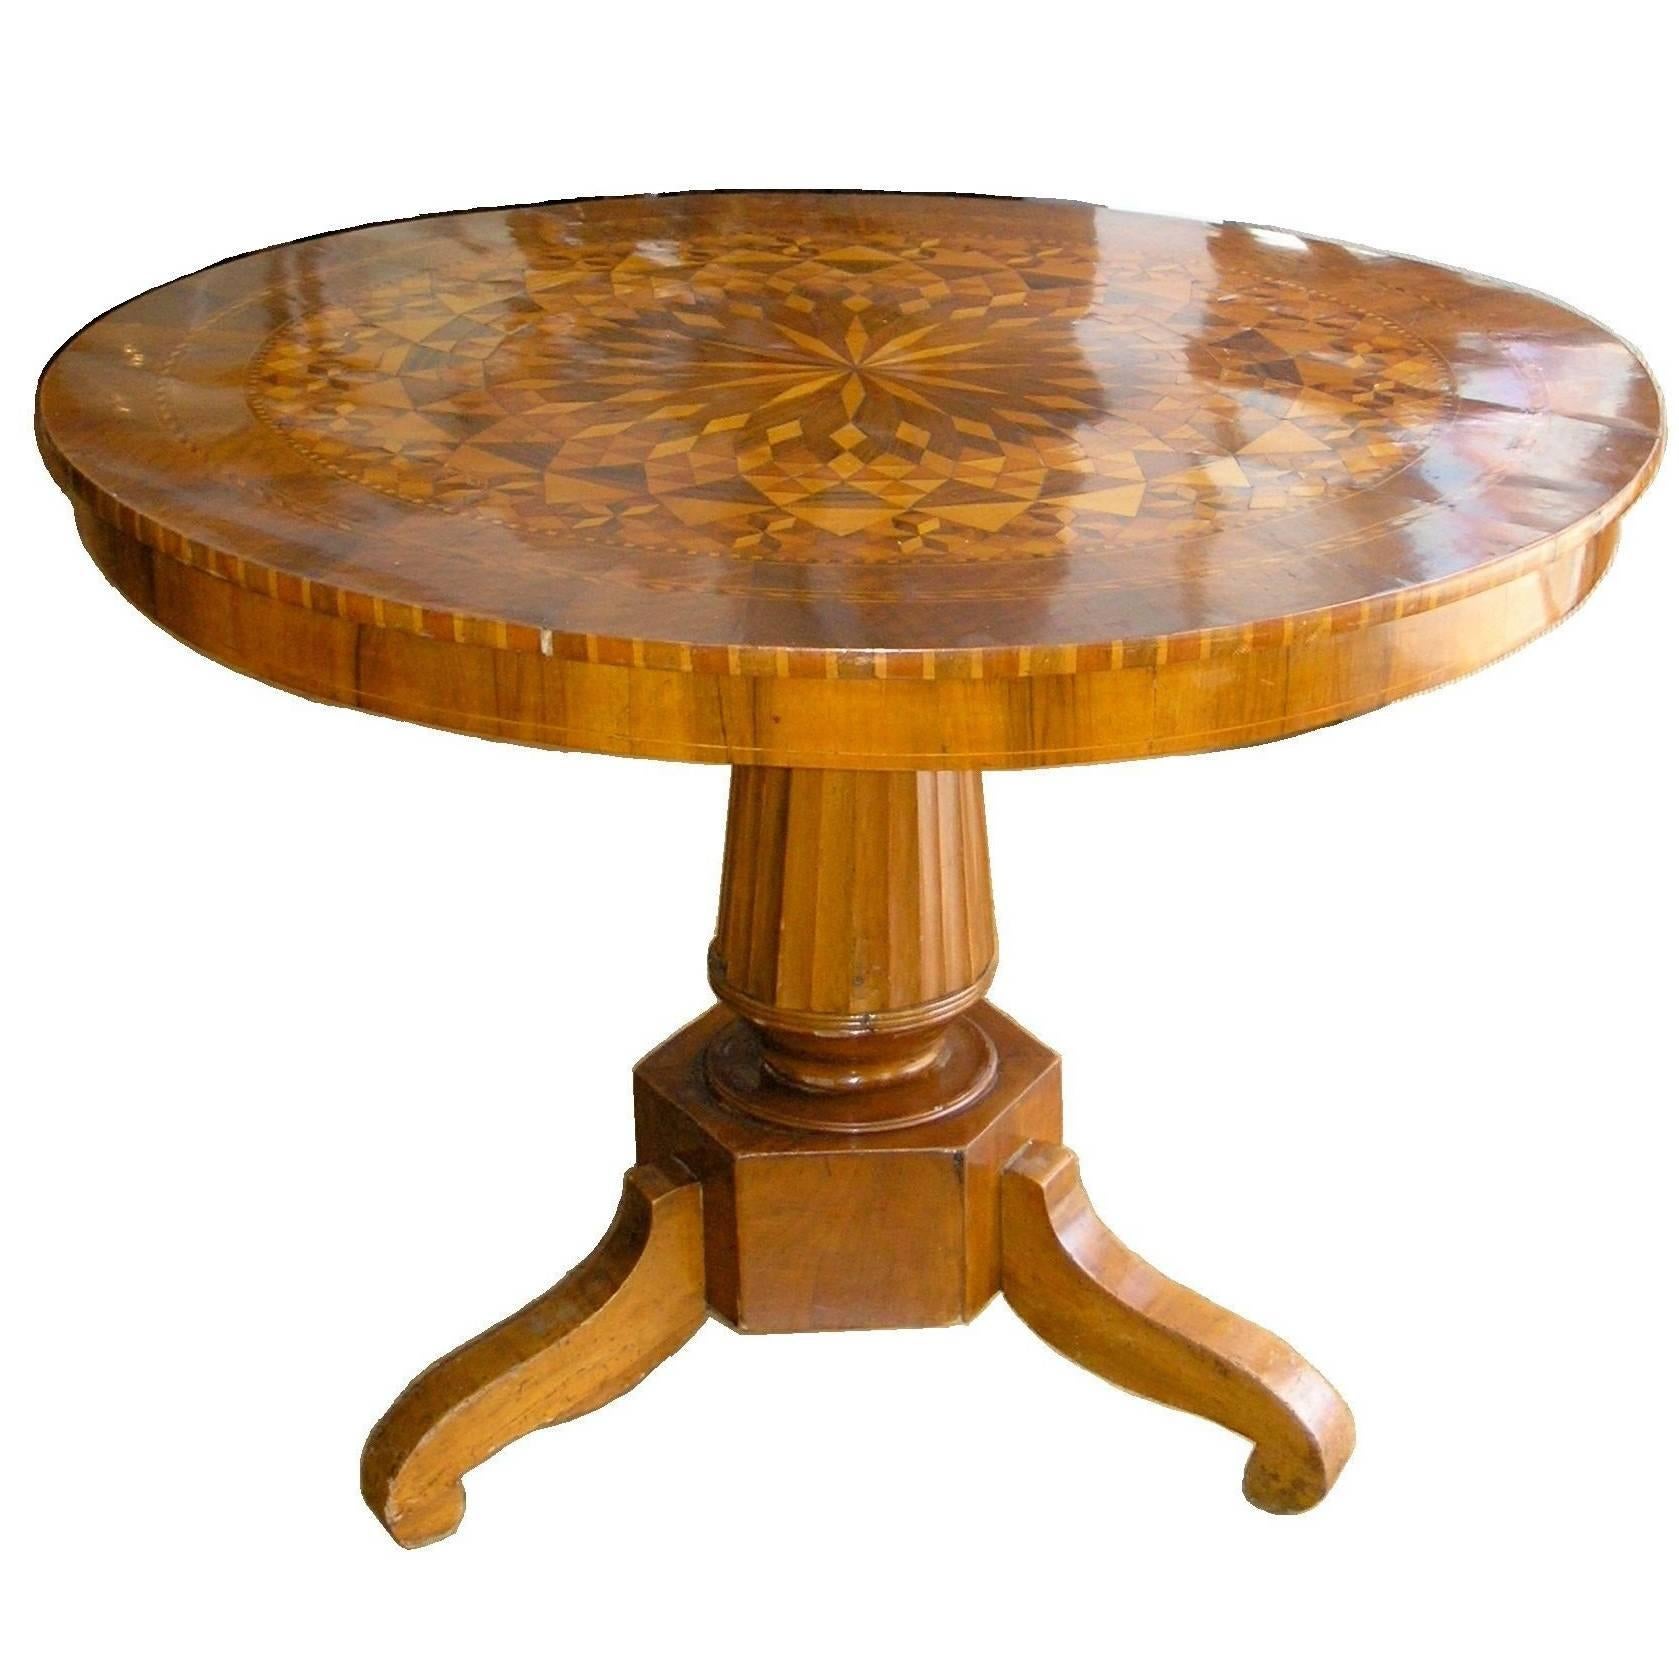 Italian Marquetry Centre Table, 19th Century For Sale